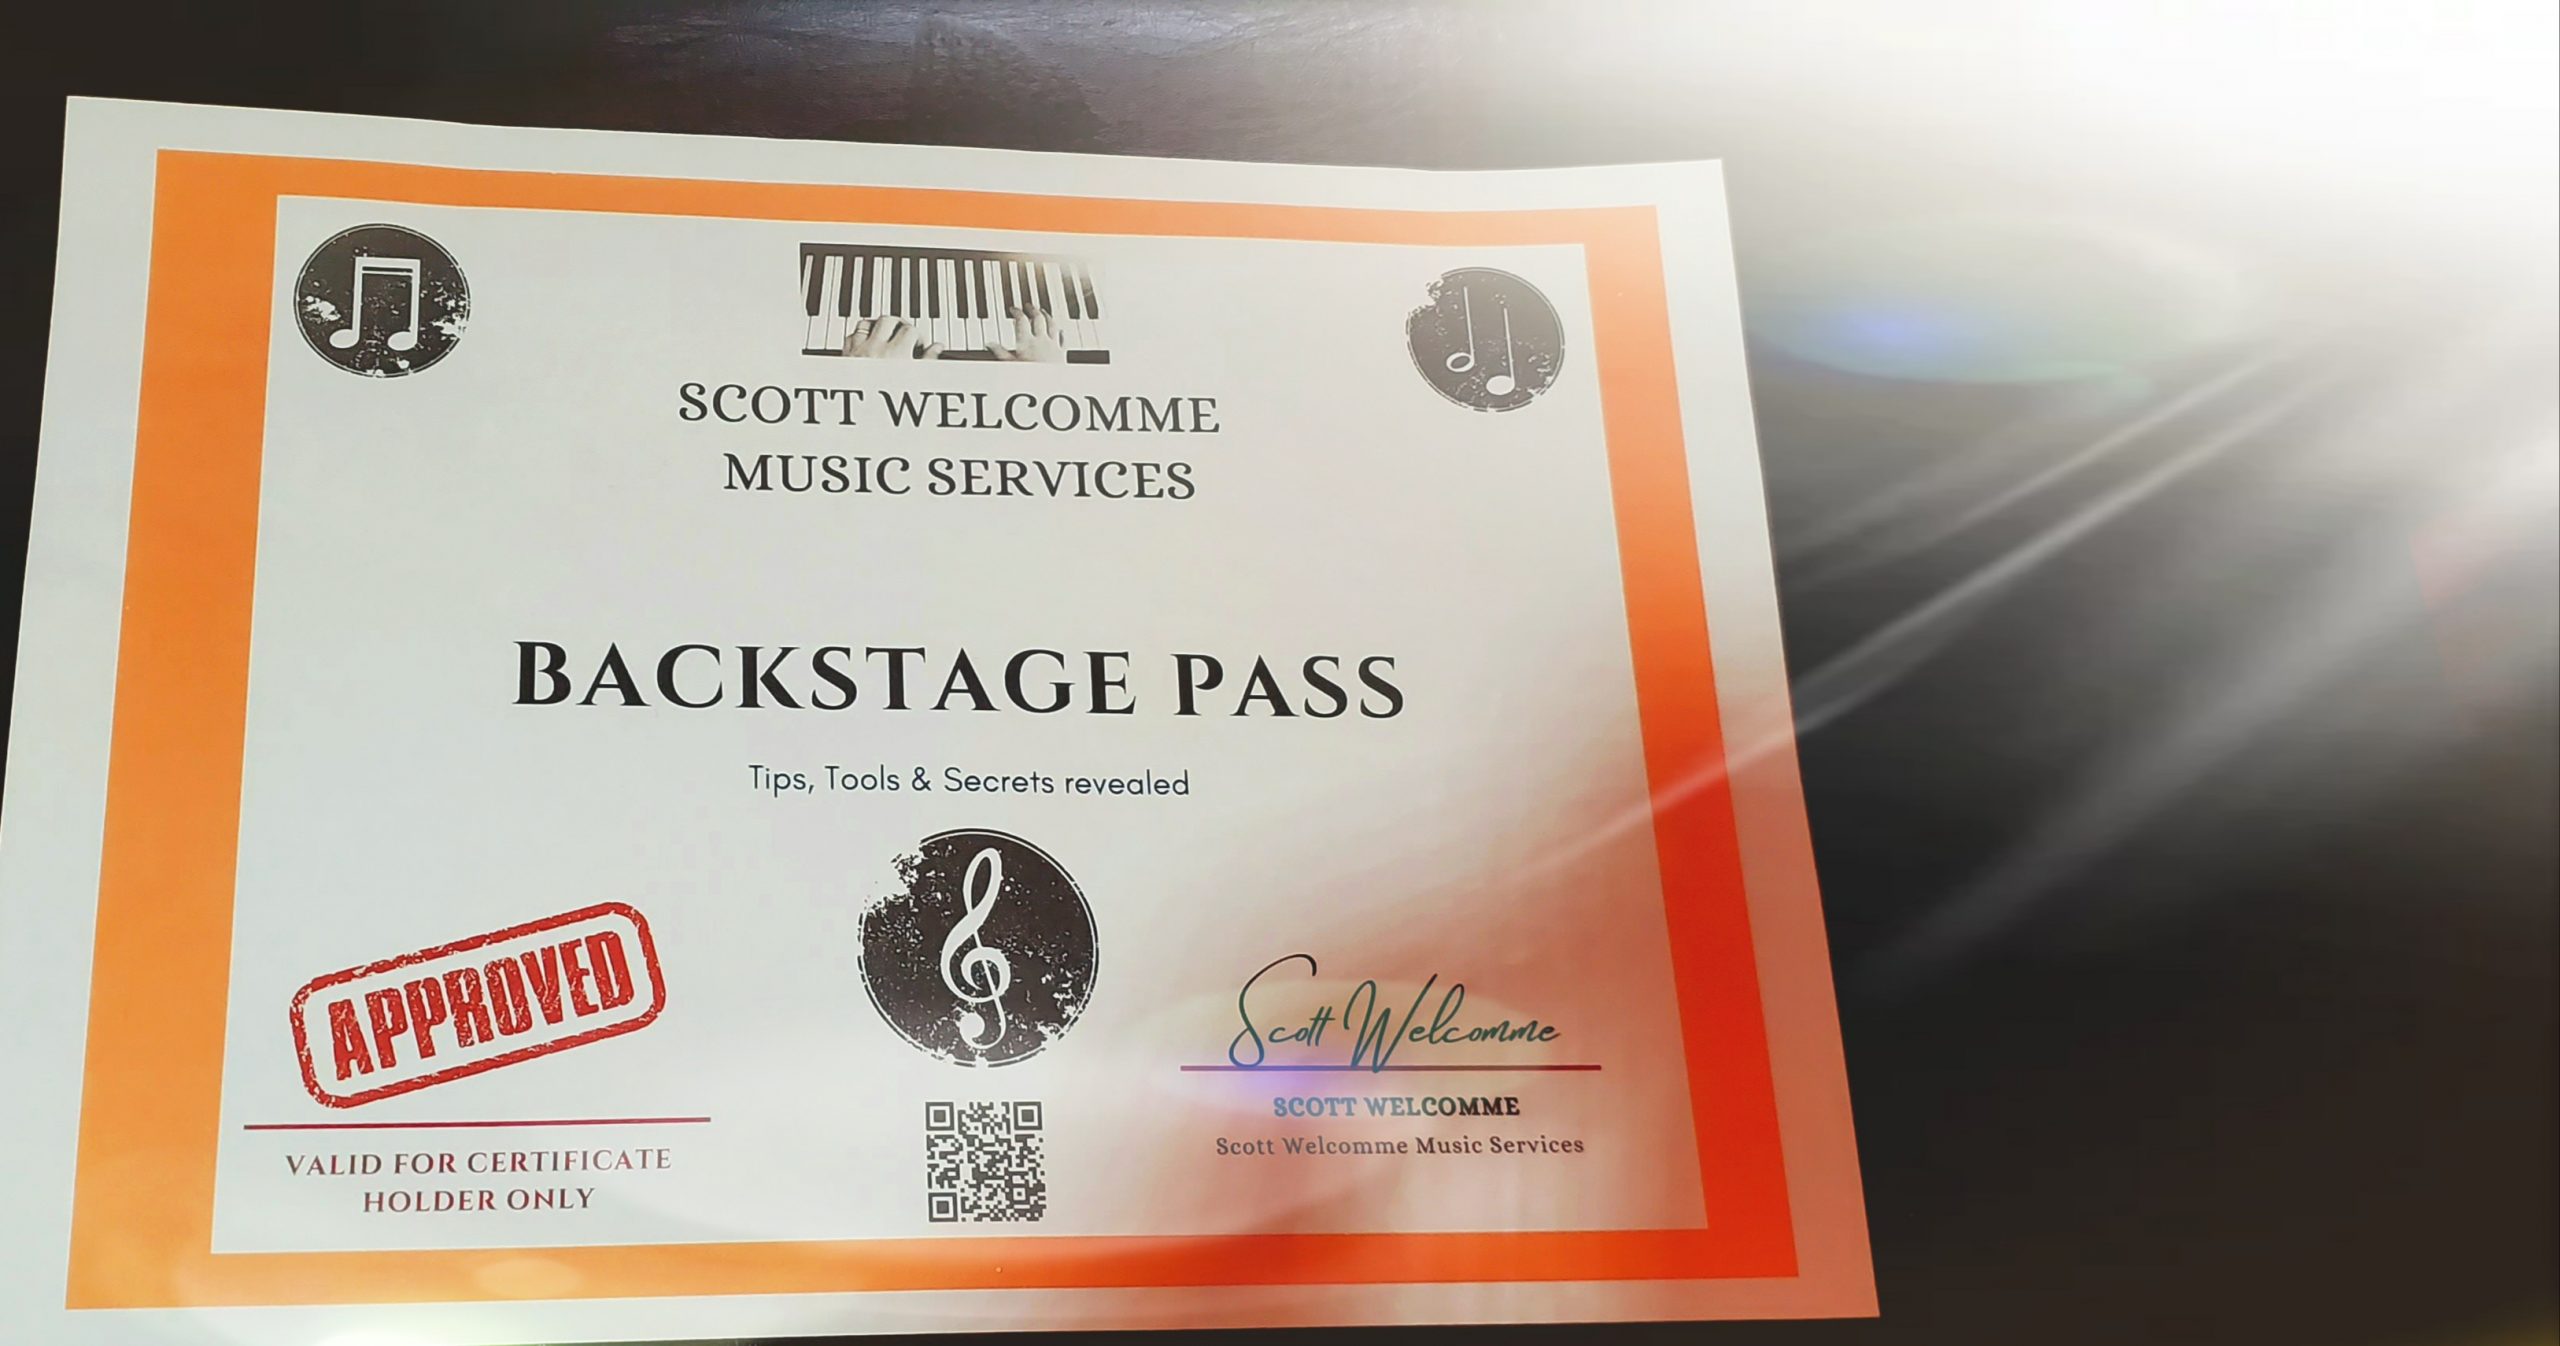 Backstage Pass in the Spotlight